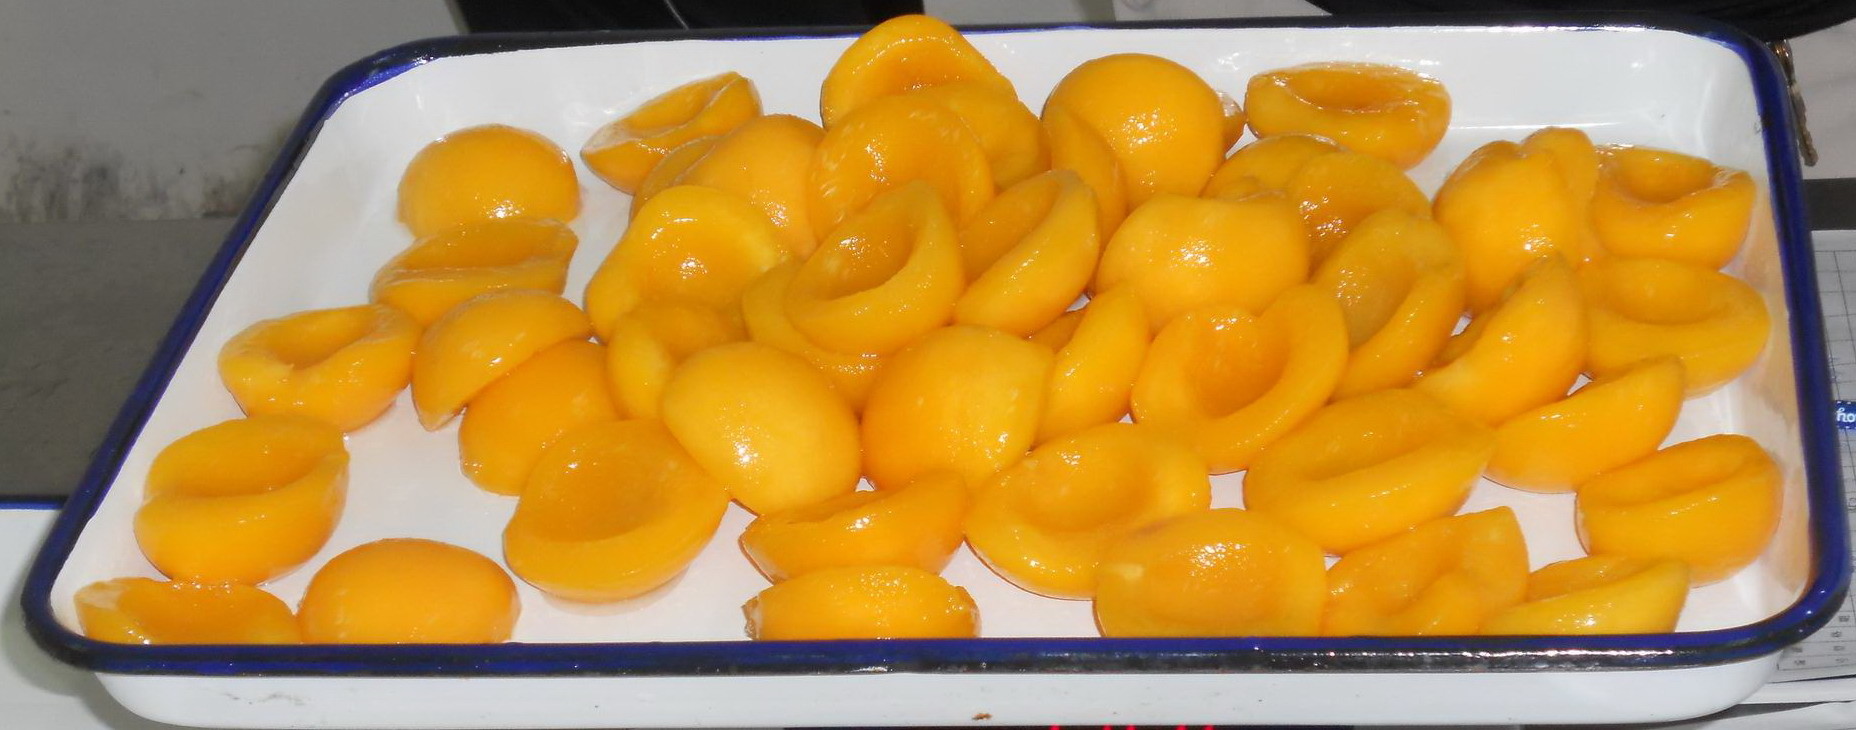 China Safe New Season Canned Half Peaches In Heavy Syrup Tastes Juicy And Sweet wholesale